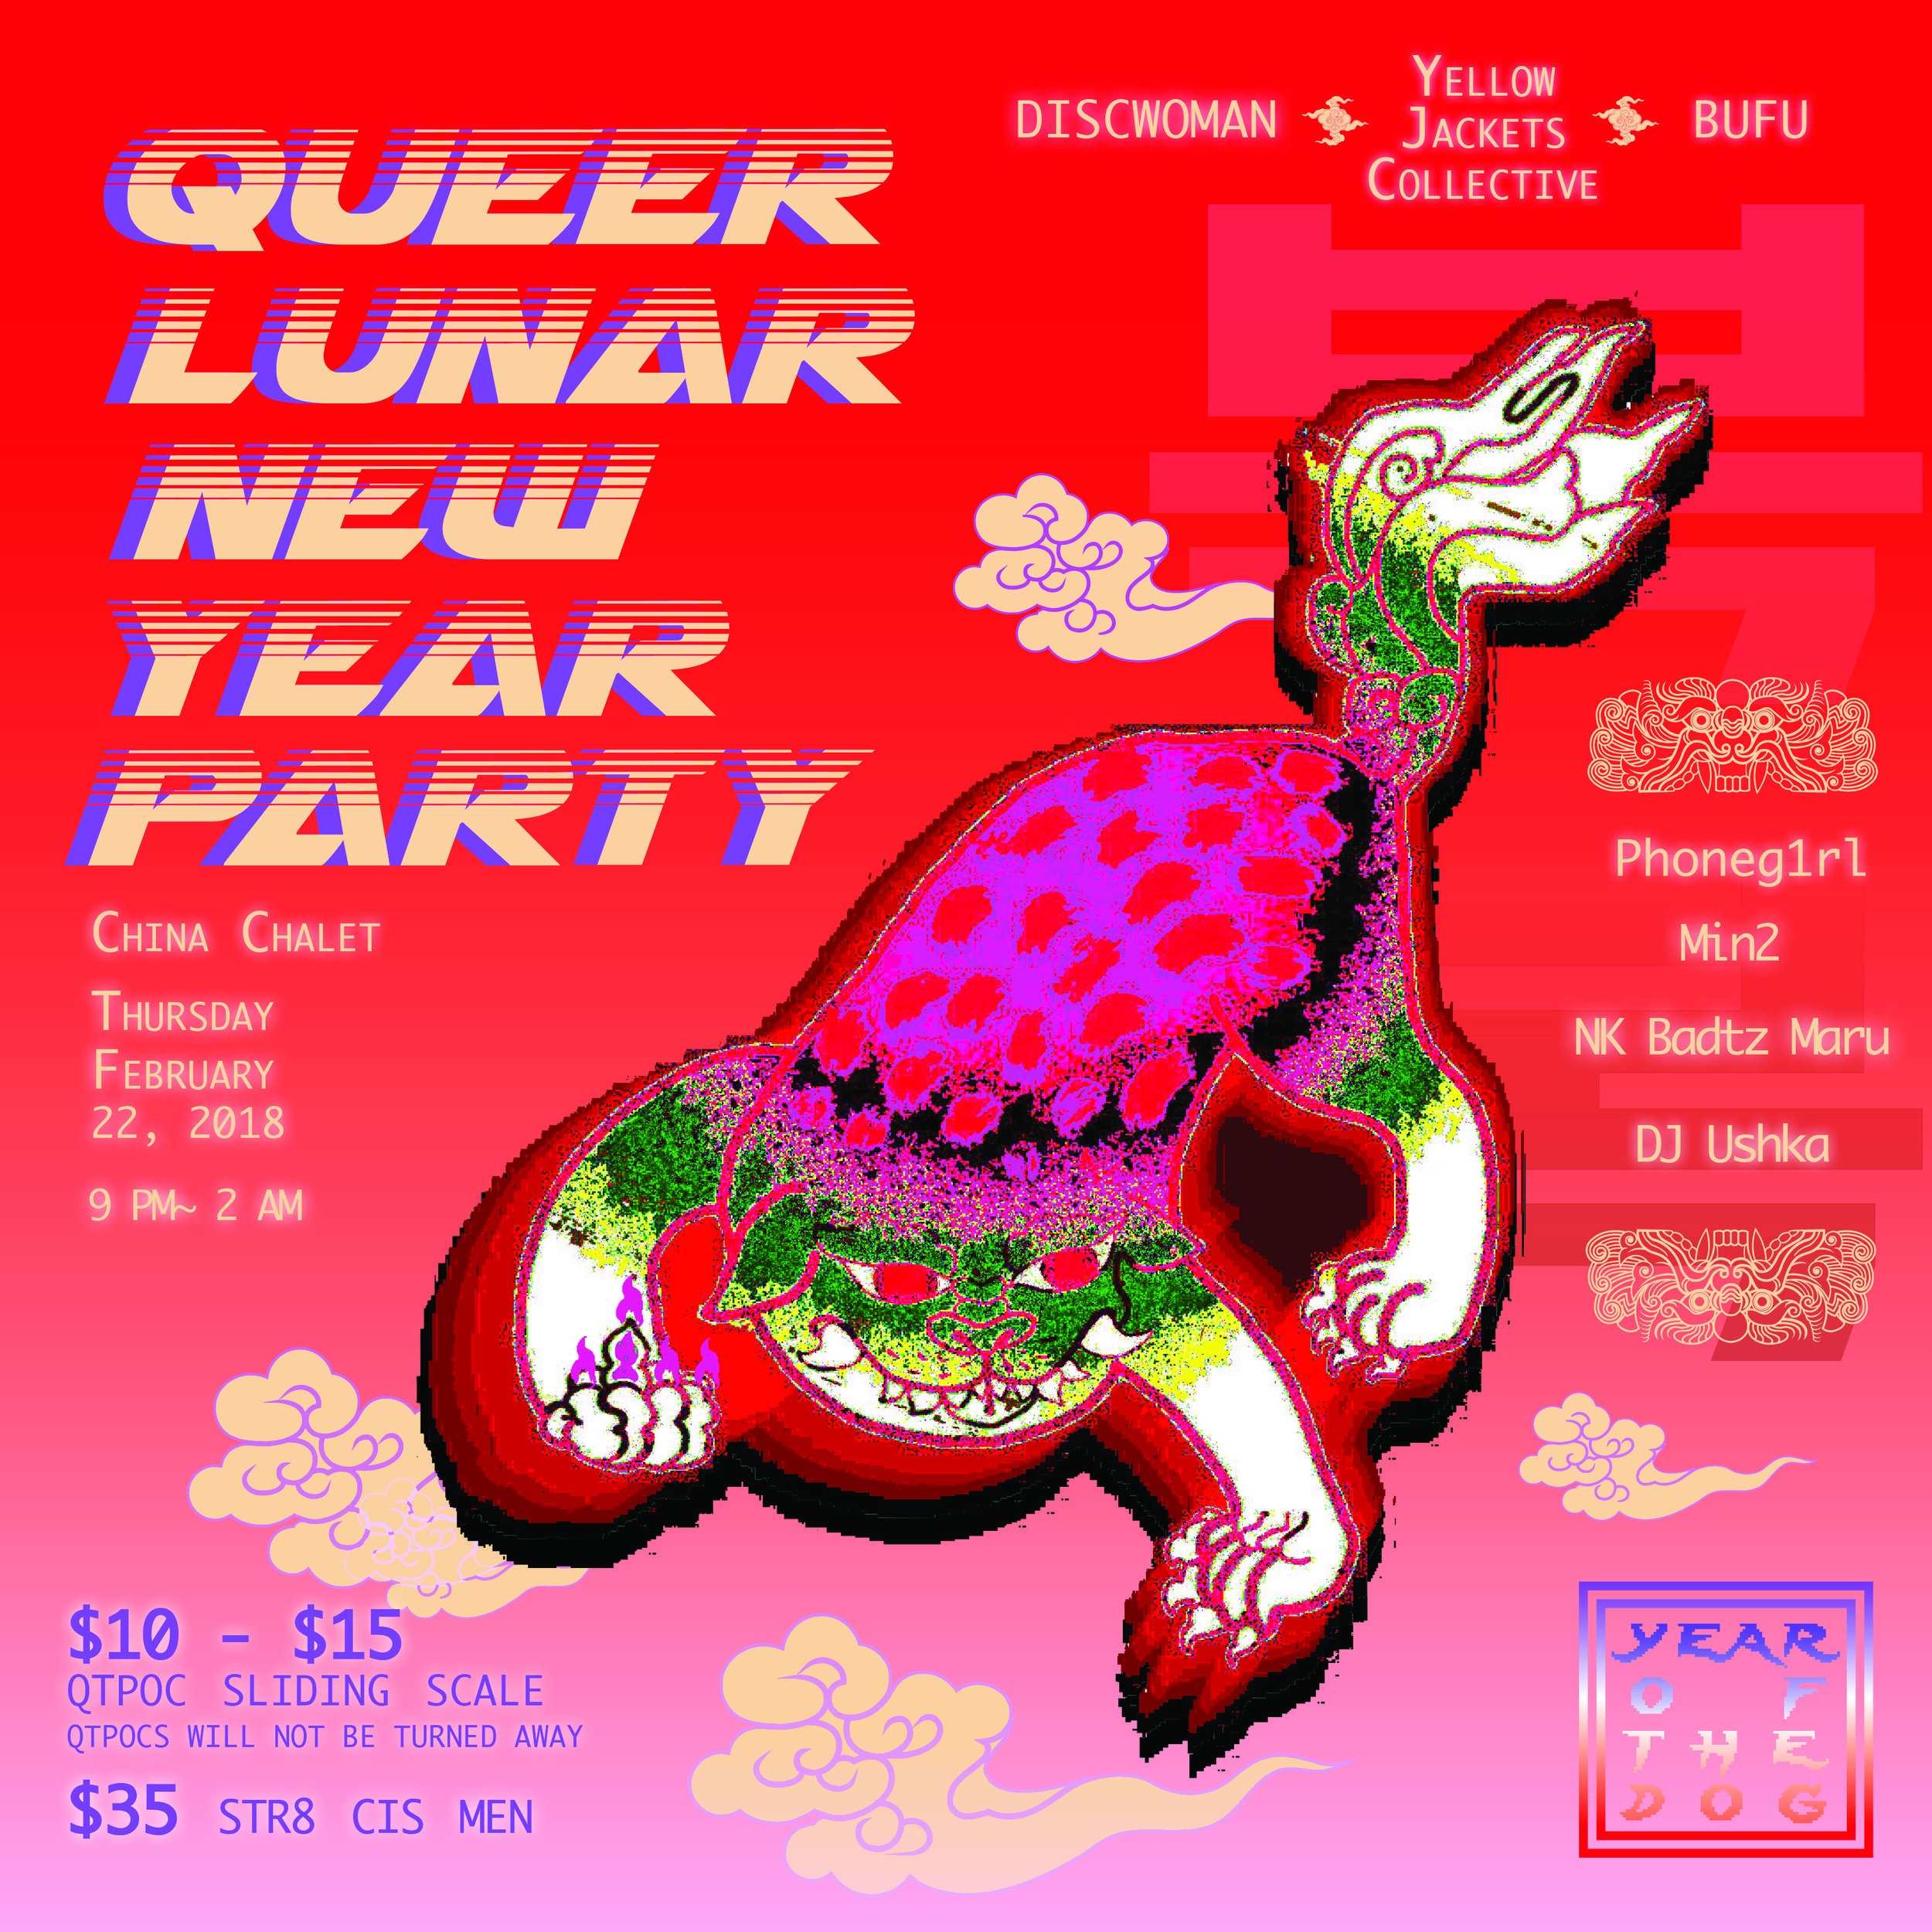 Queer Lunar New Year